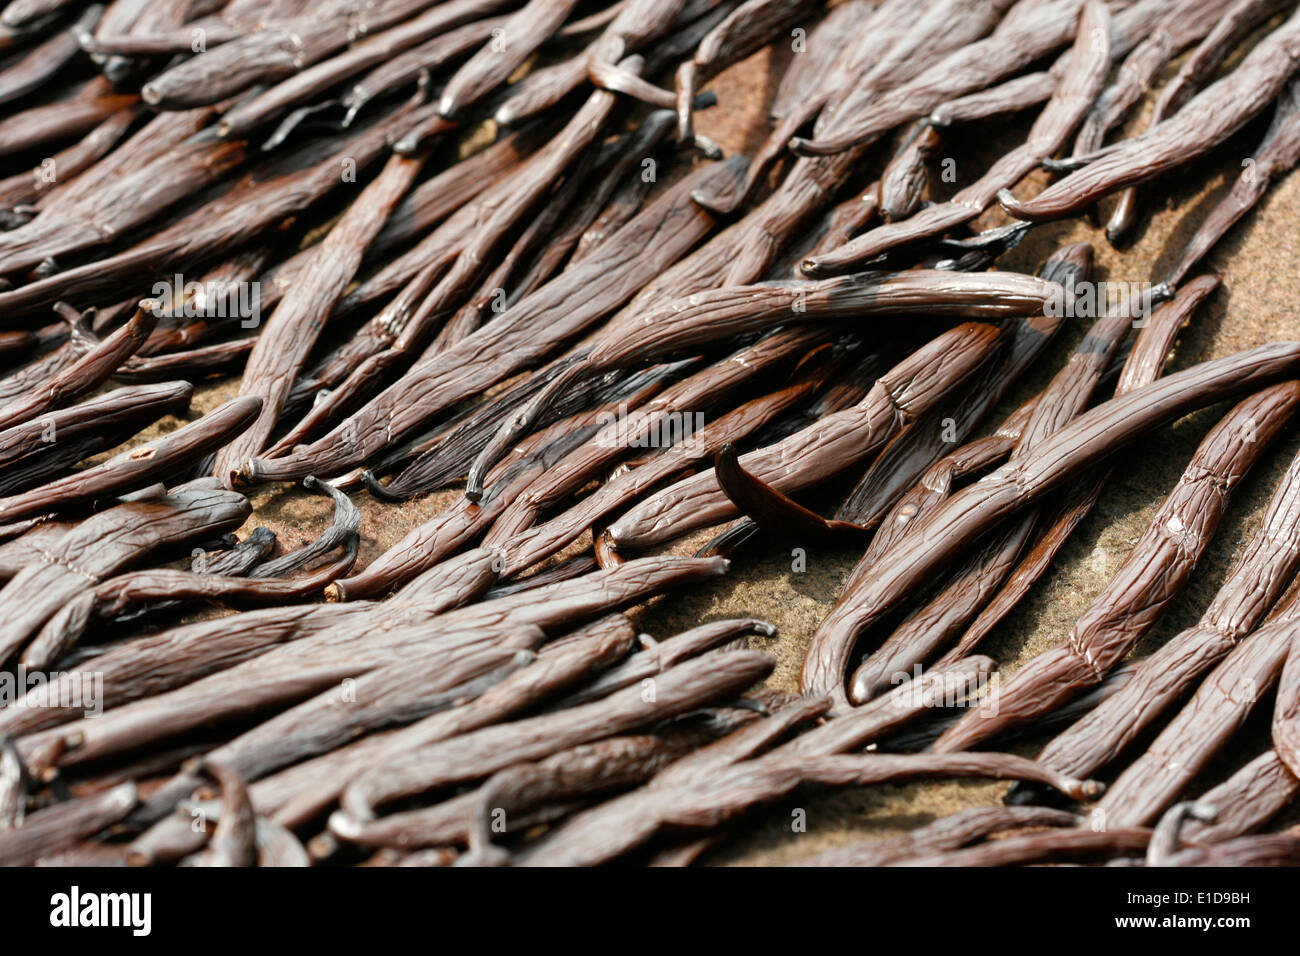 Vanilla beans laid out to dry on a processing table as part of the curing process. Uganda Stock Photo